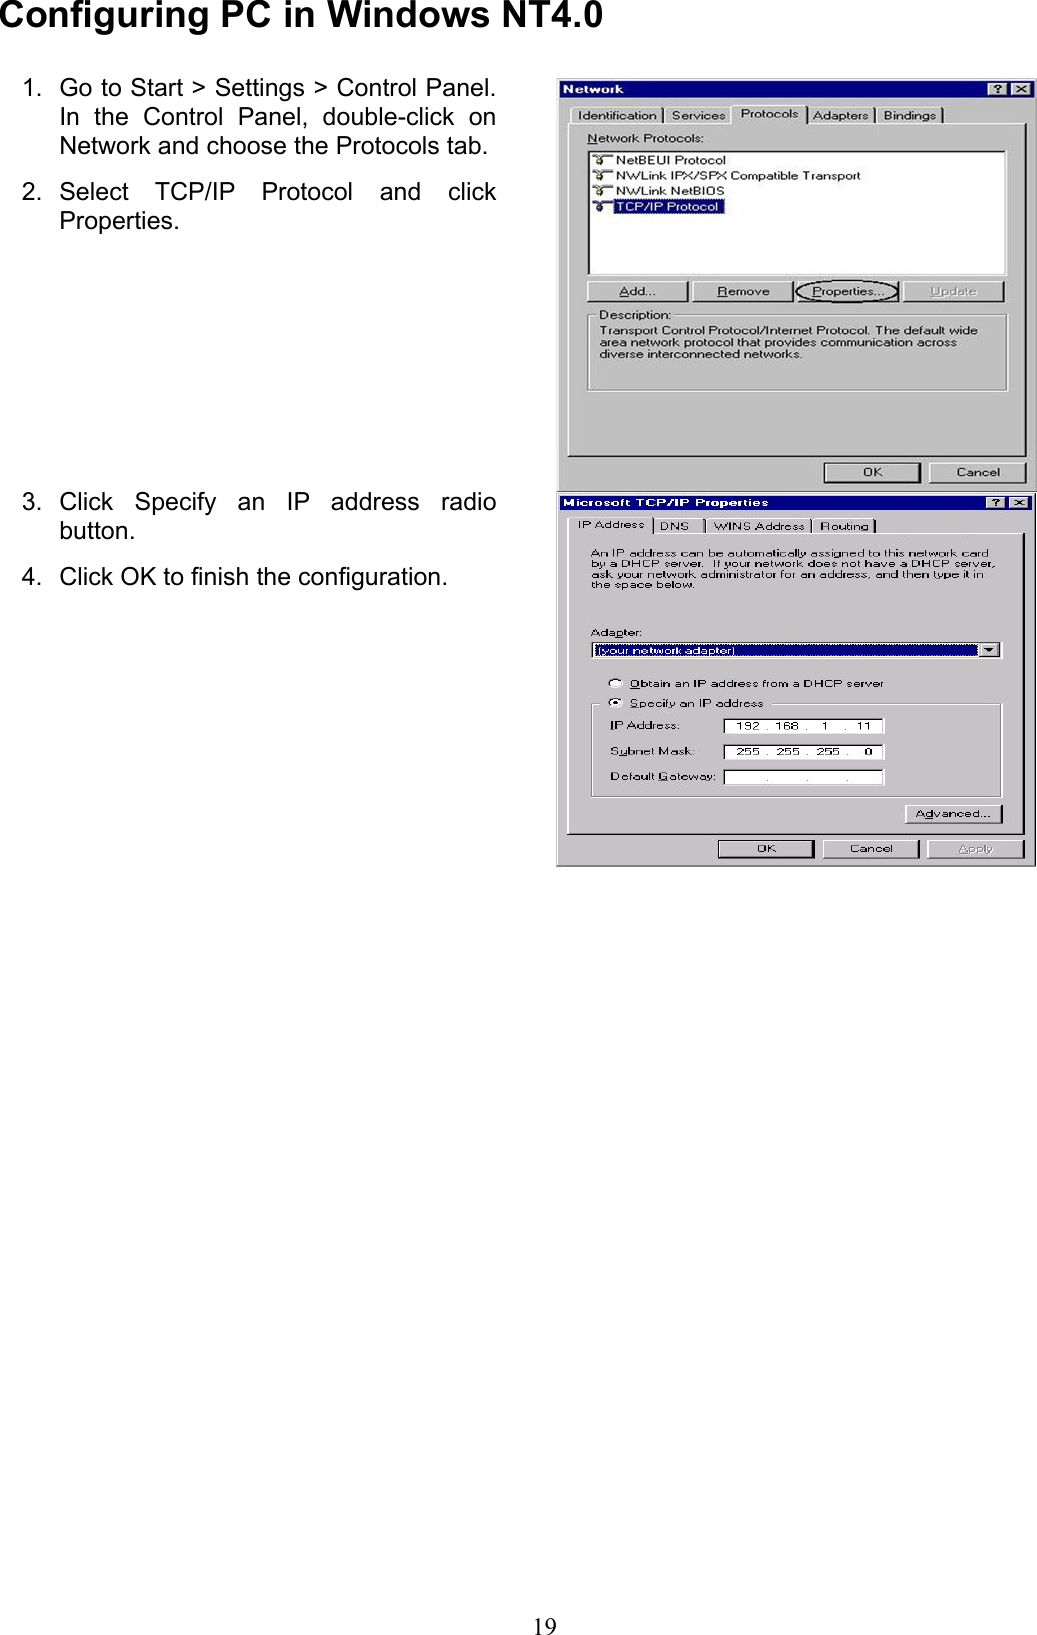 Conguring PC in Windows NT4.0Go to Start &gt; Settings &gt; Control Panel. 1. In  the  Control  Panel,  double-click  on Network and choose the Protocols tab.Select  TCP/IP  Protocol  and  click 2. Properties.Click  Specify  an  IP  address  radio 3. button.Click OK to nish the conguration.4. 19